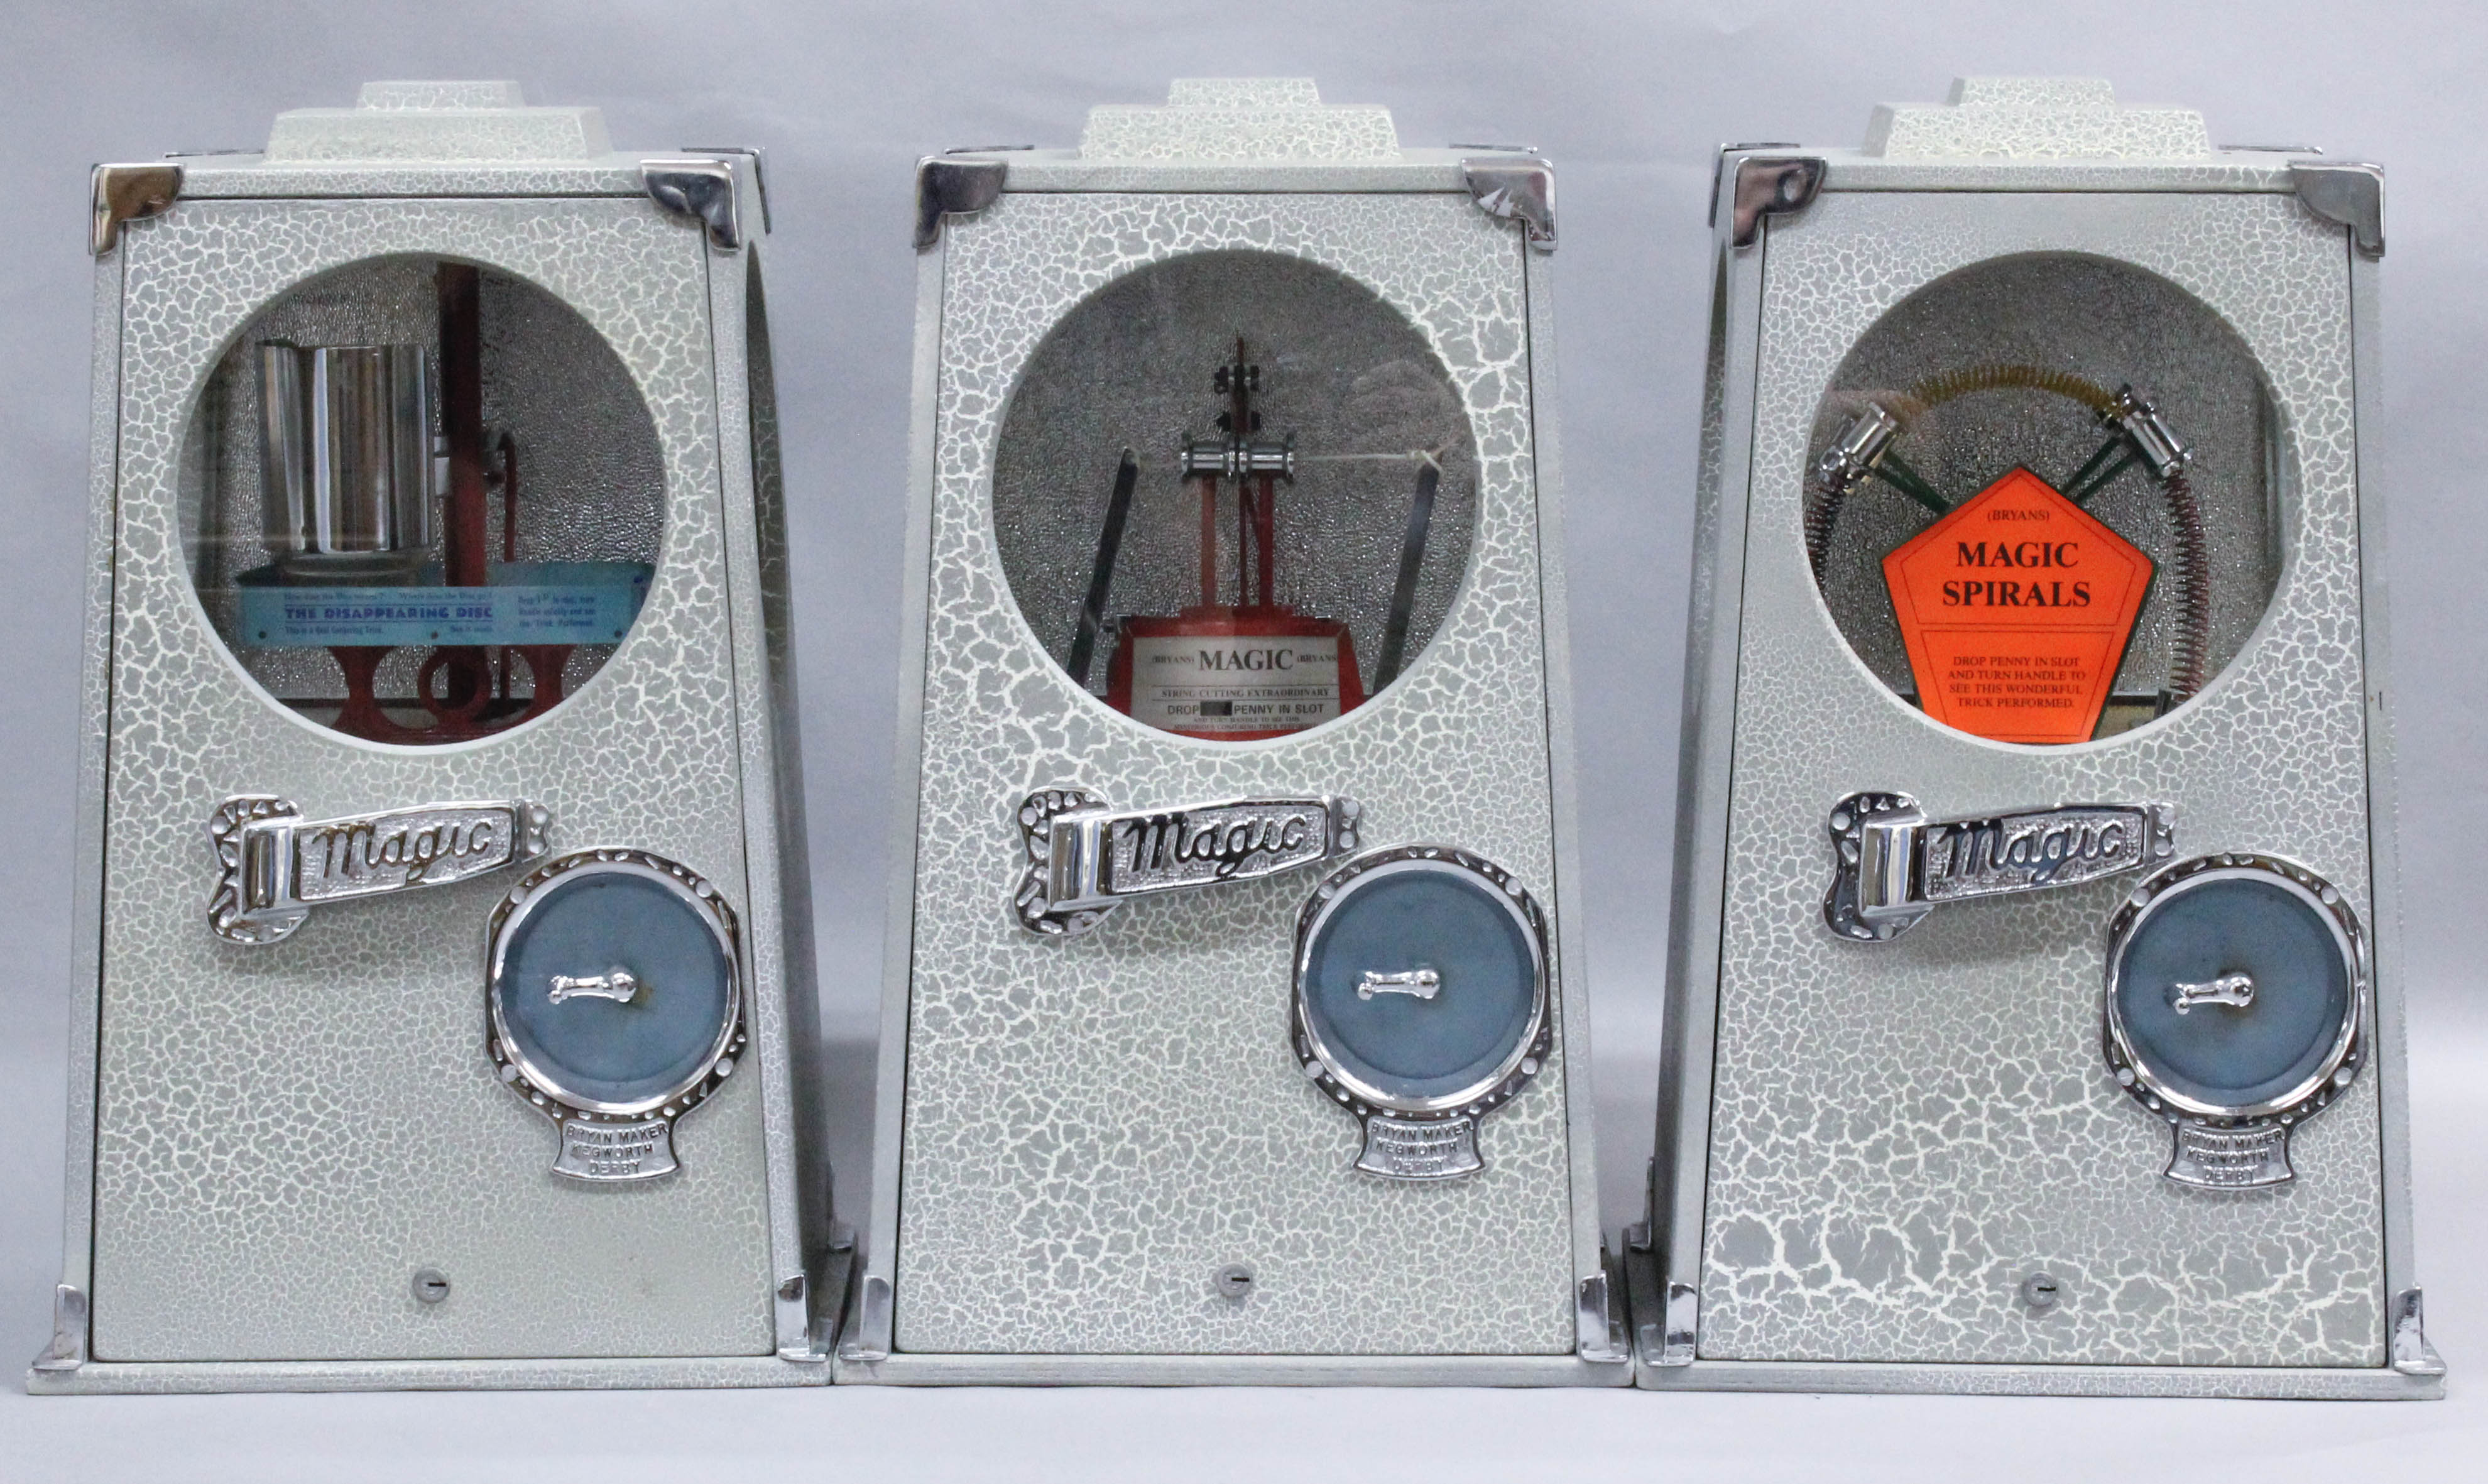 A set of three 1970's Bryans "Penny-in-the-Slot" "Magic" machines - "The Disappearing Disc" Serial